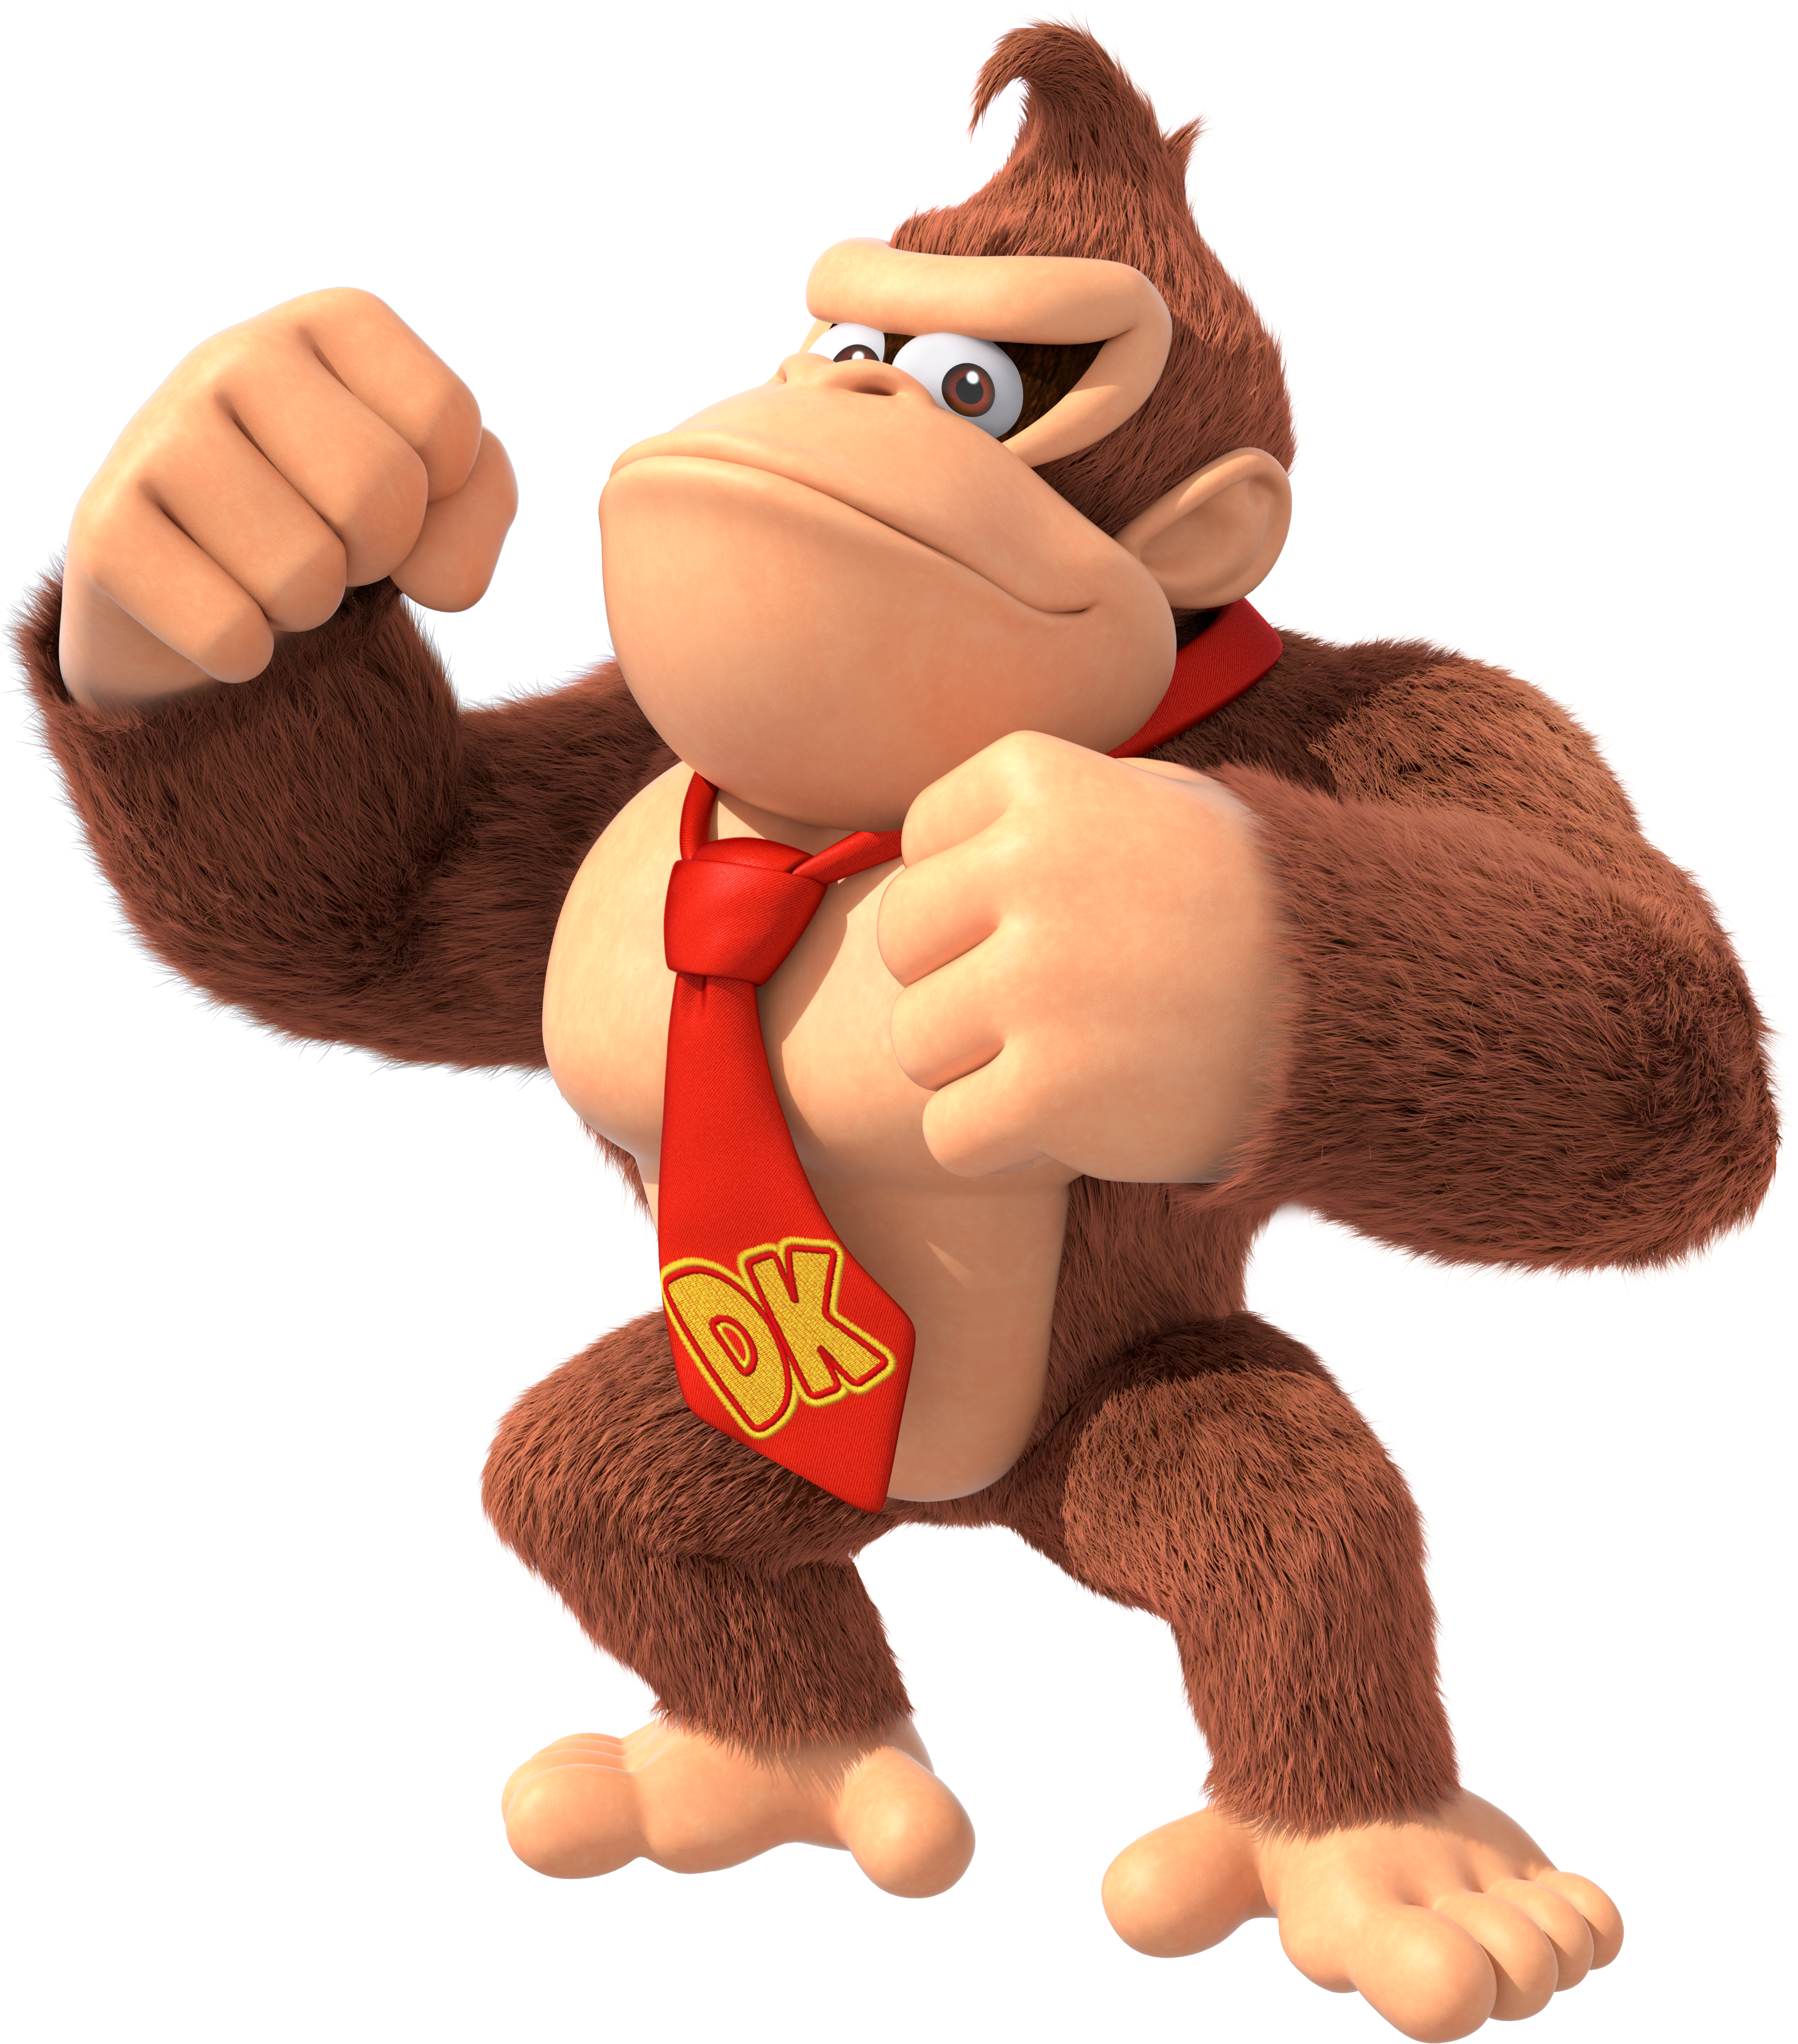 Donkey Kong screenshots, images and pictures   Giant Bomb